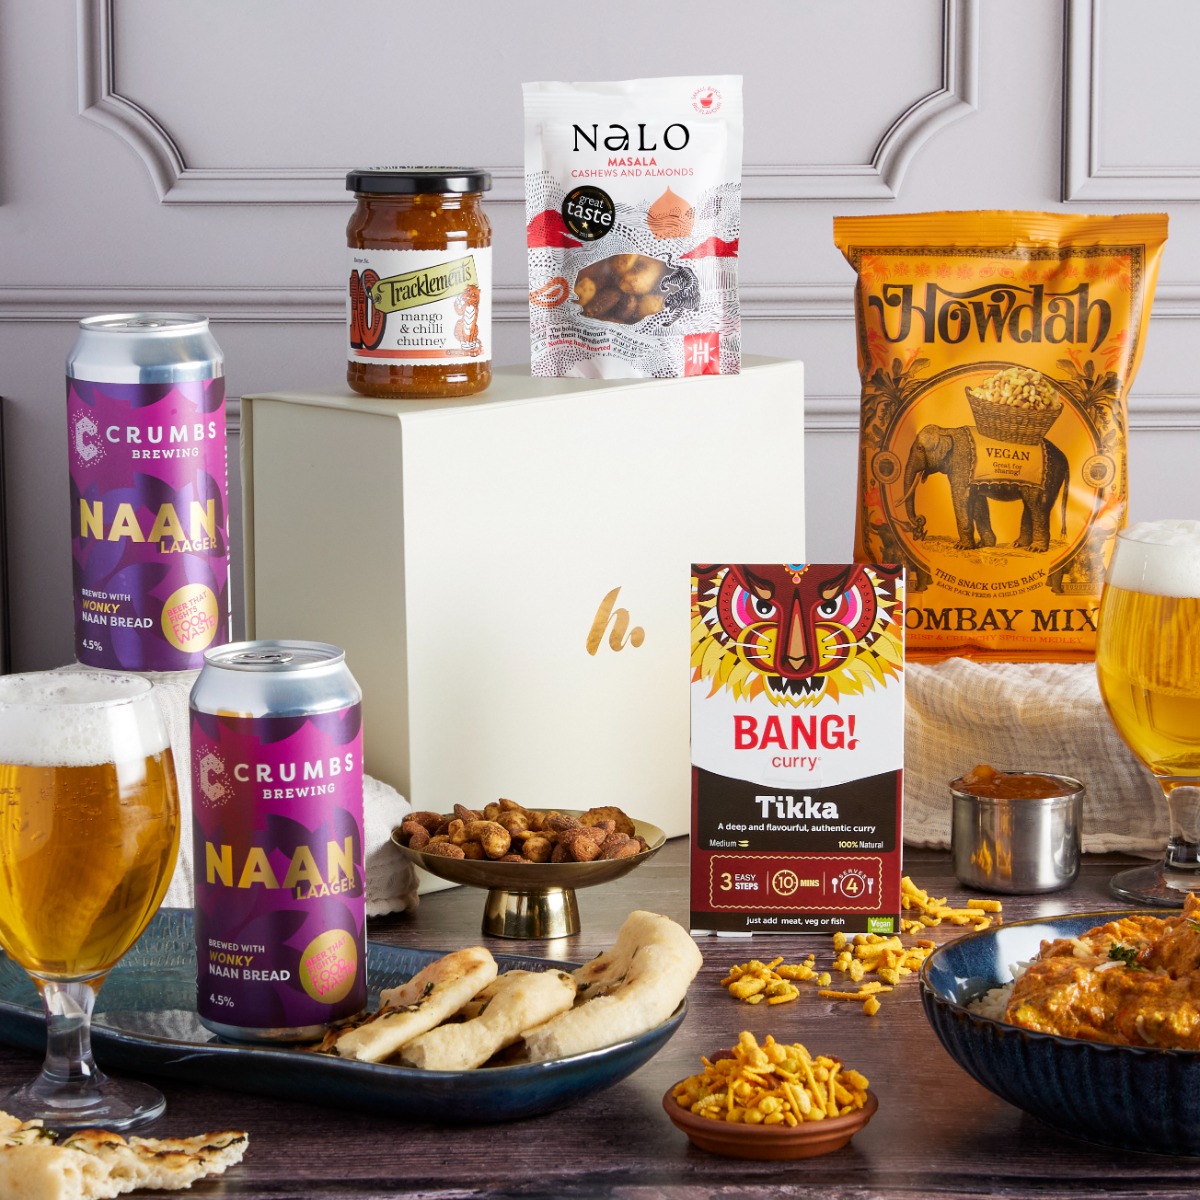 Curry Night Indian Beer Hamper with contents on display - as a recommendation for a last minute Father's Day gift